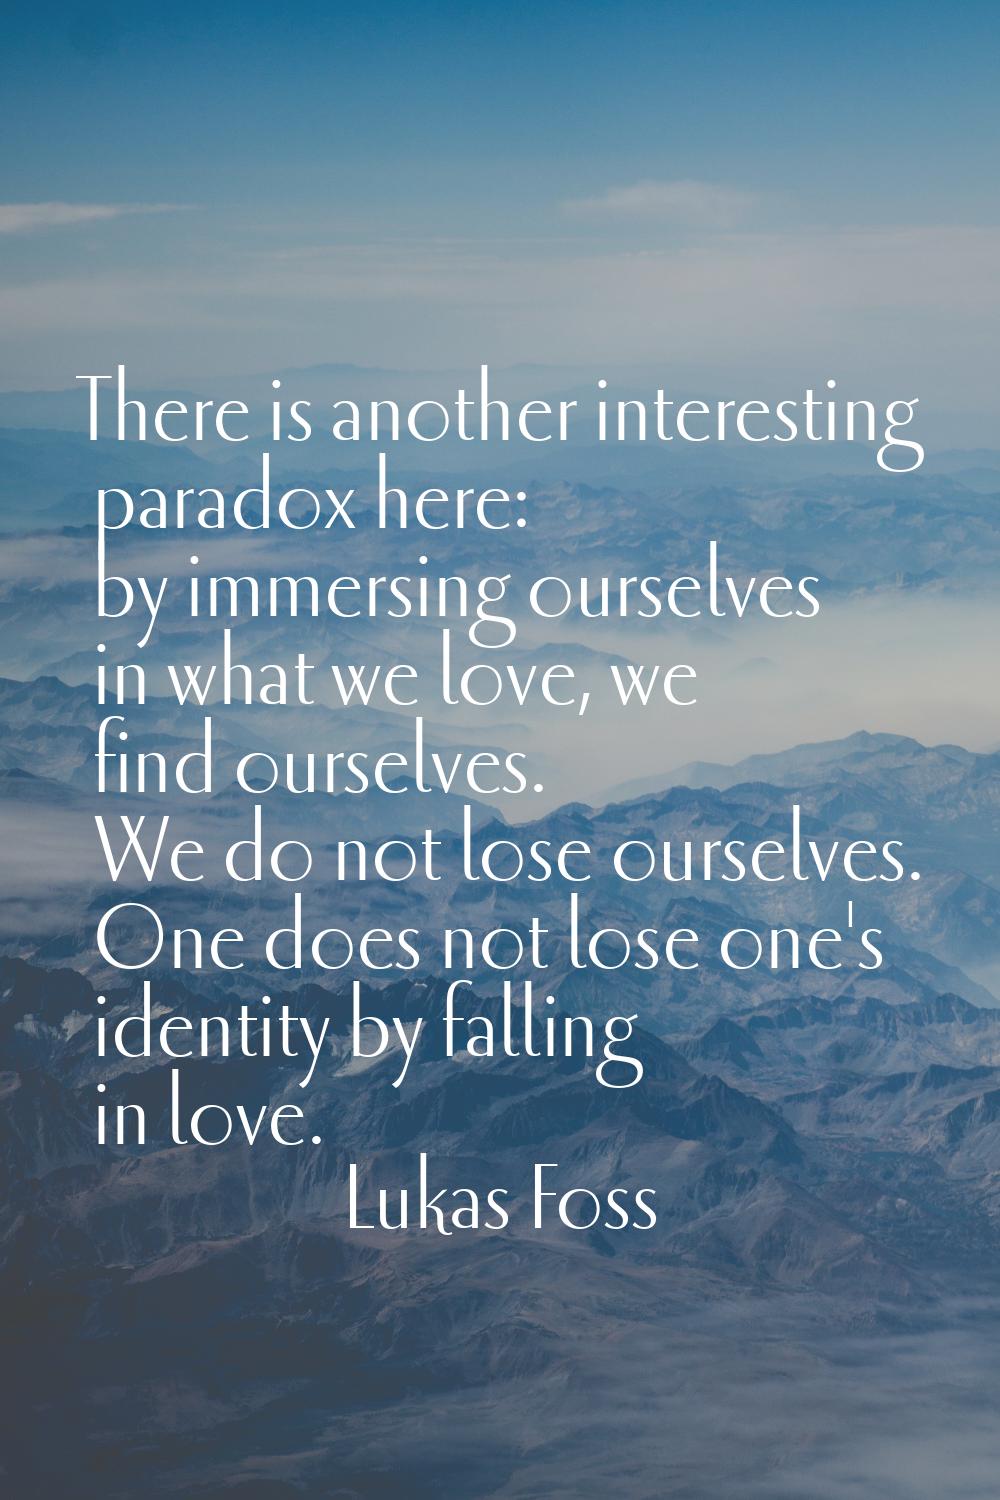 There is another interesting paradox here: by immersing ourselves in what we love, we find ourselve